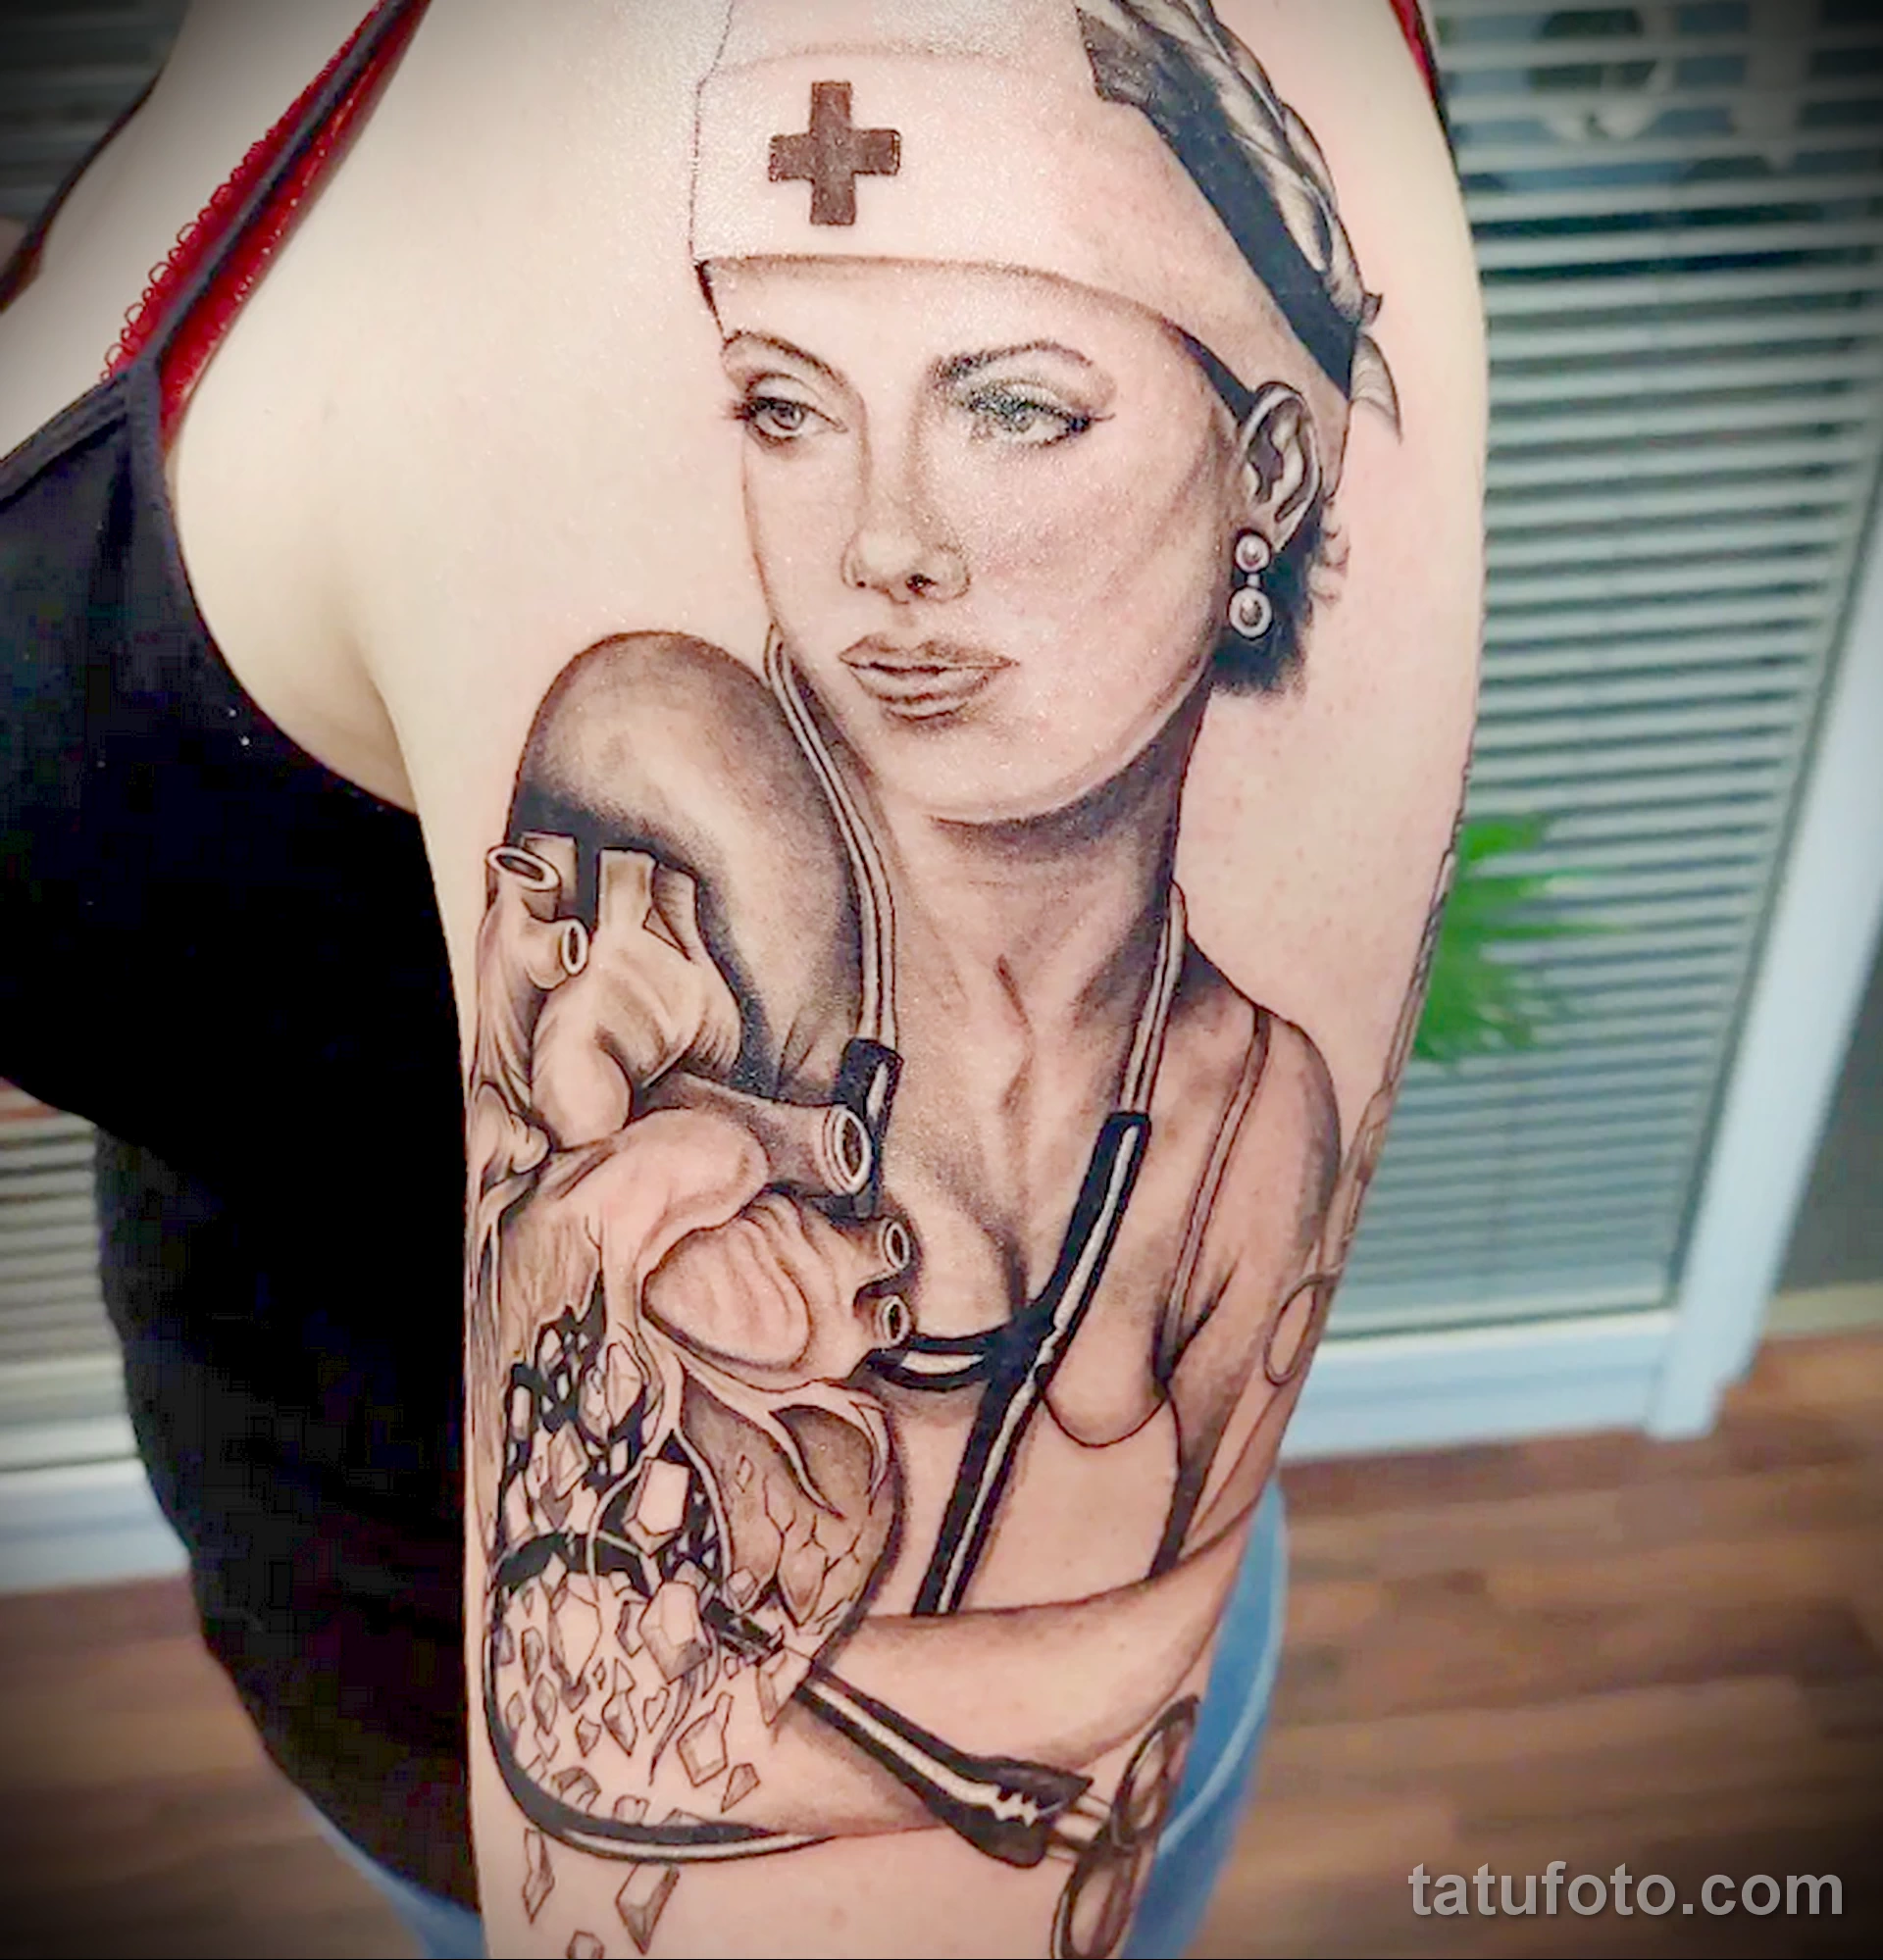 38 Beautiful Nurse Tattoos with Meaning  Our Mindful Life